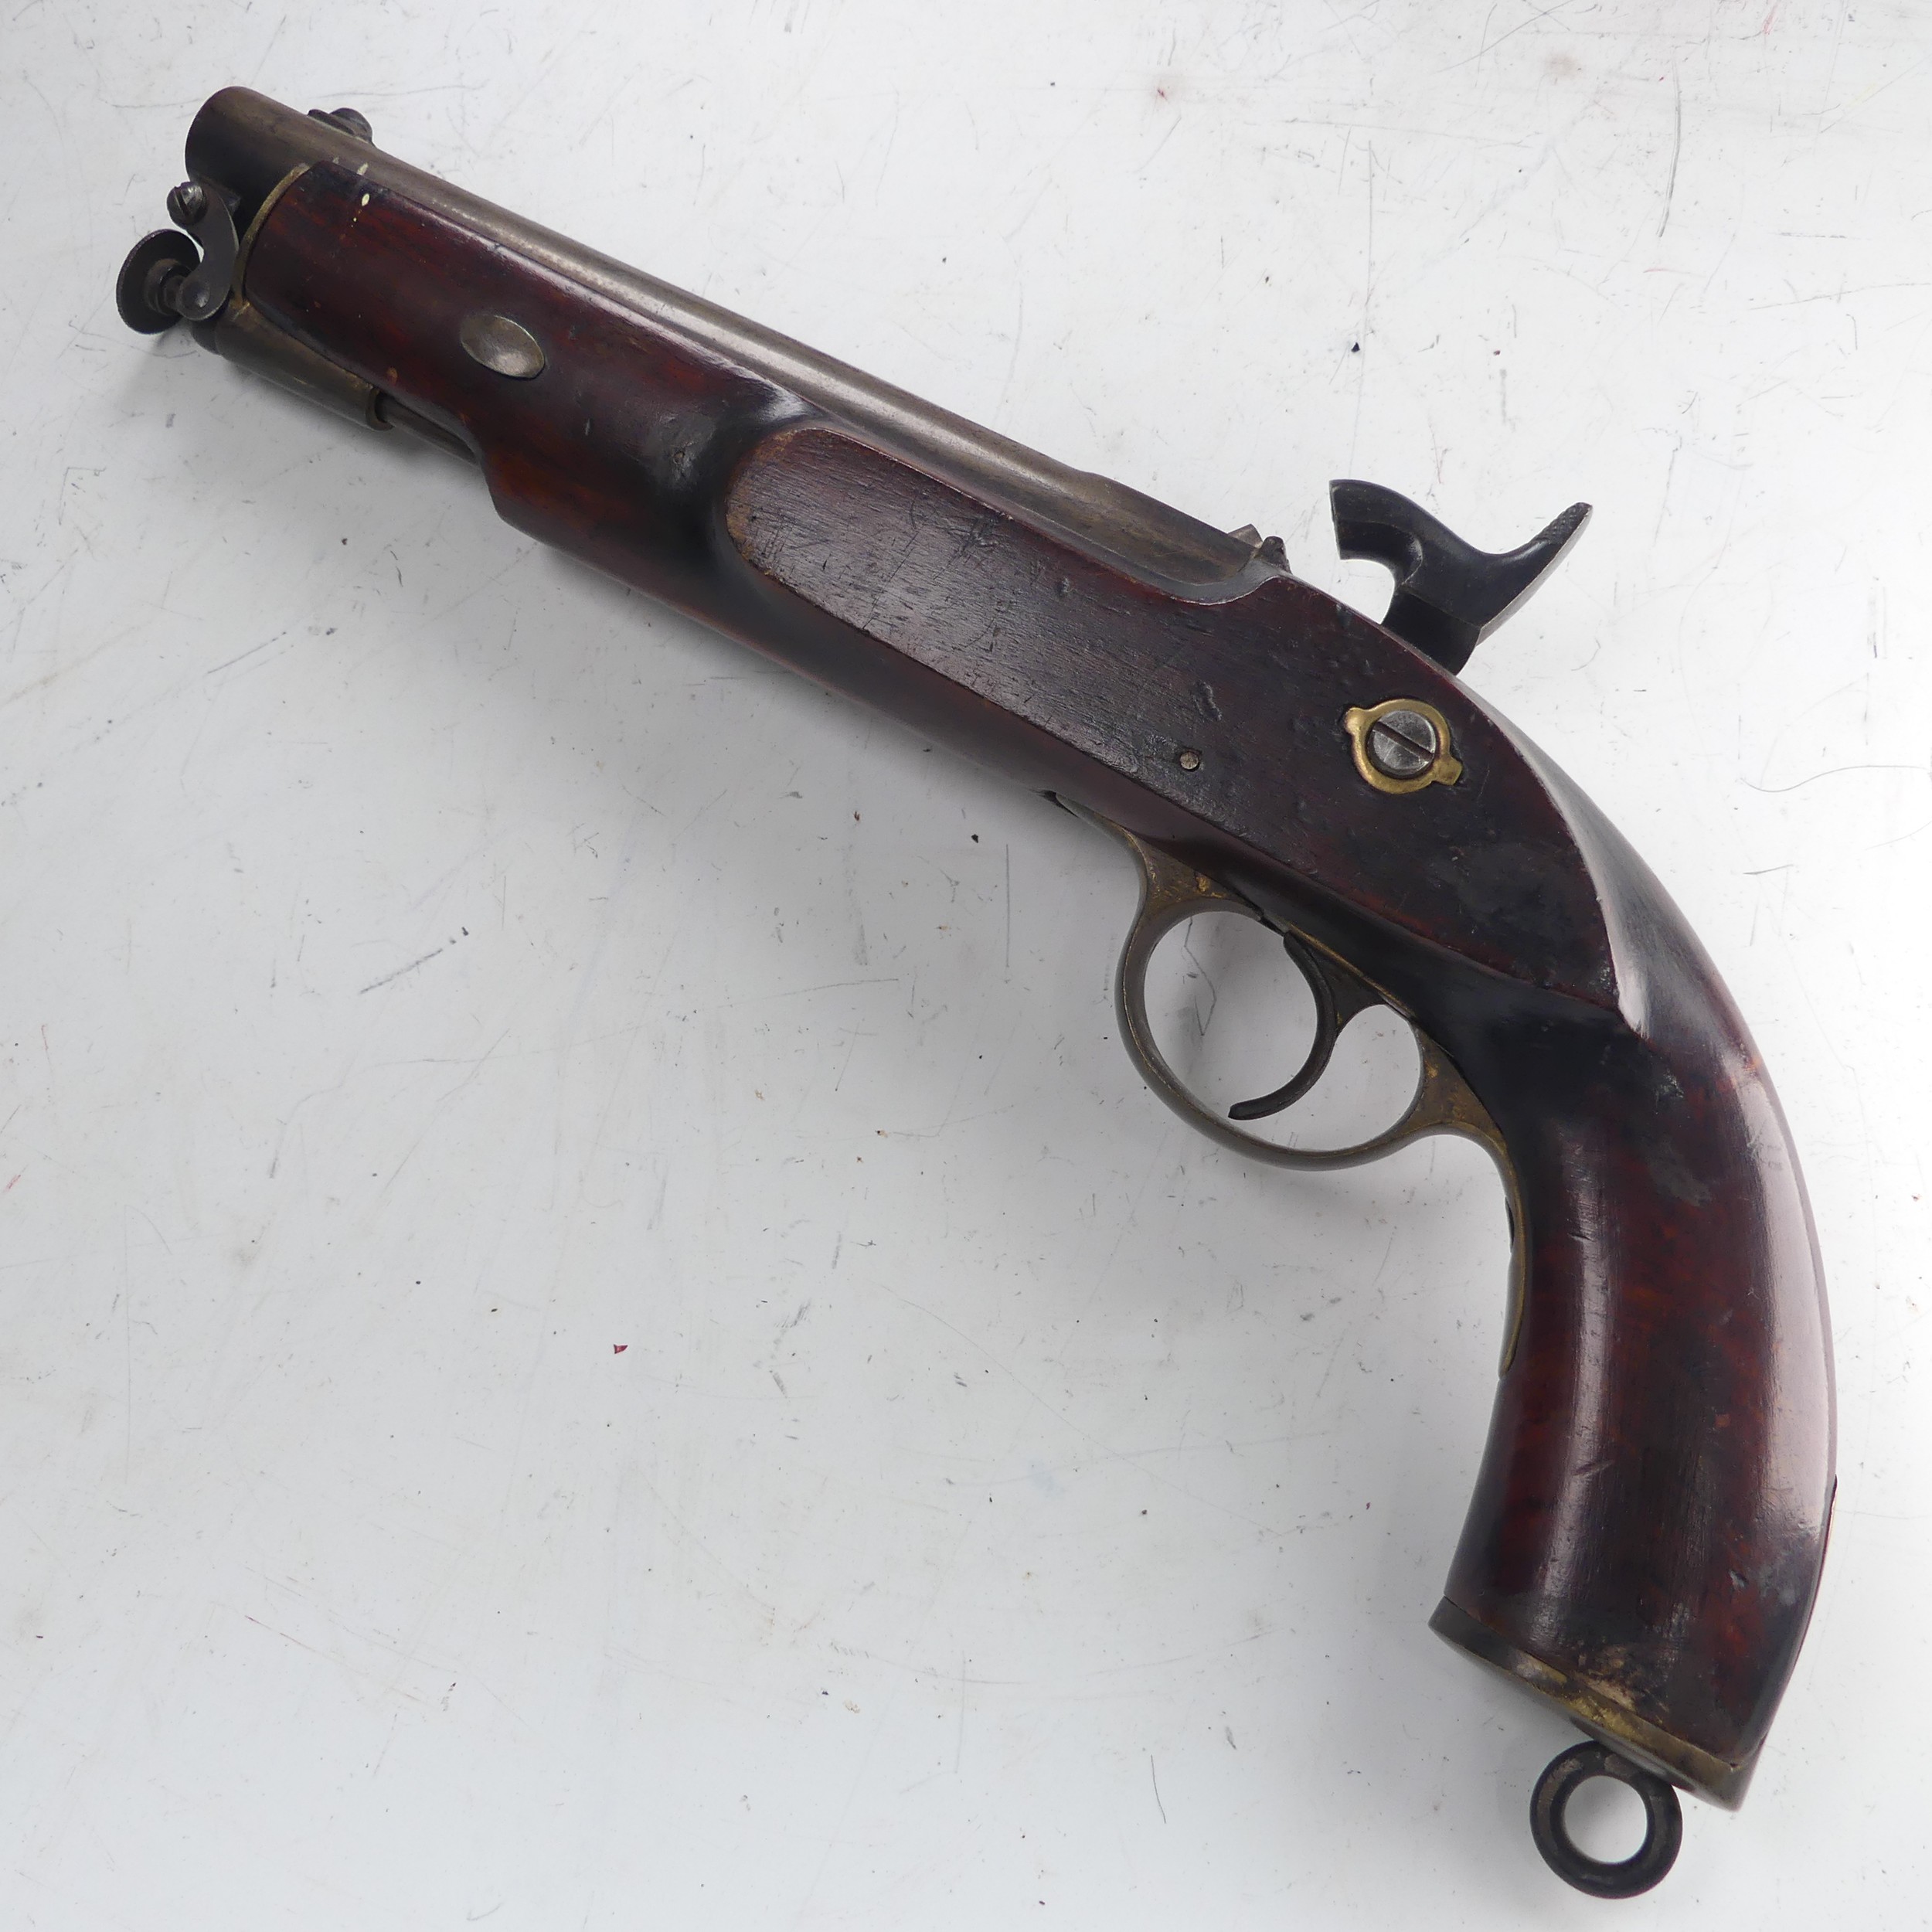 A 19th century 'Enfield' percussion cap service Pistol, with walnut stock, 8 inch steel barrel, - Image 4 of 5